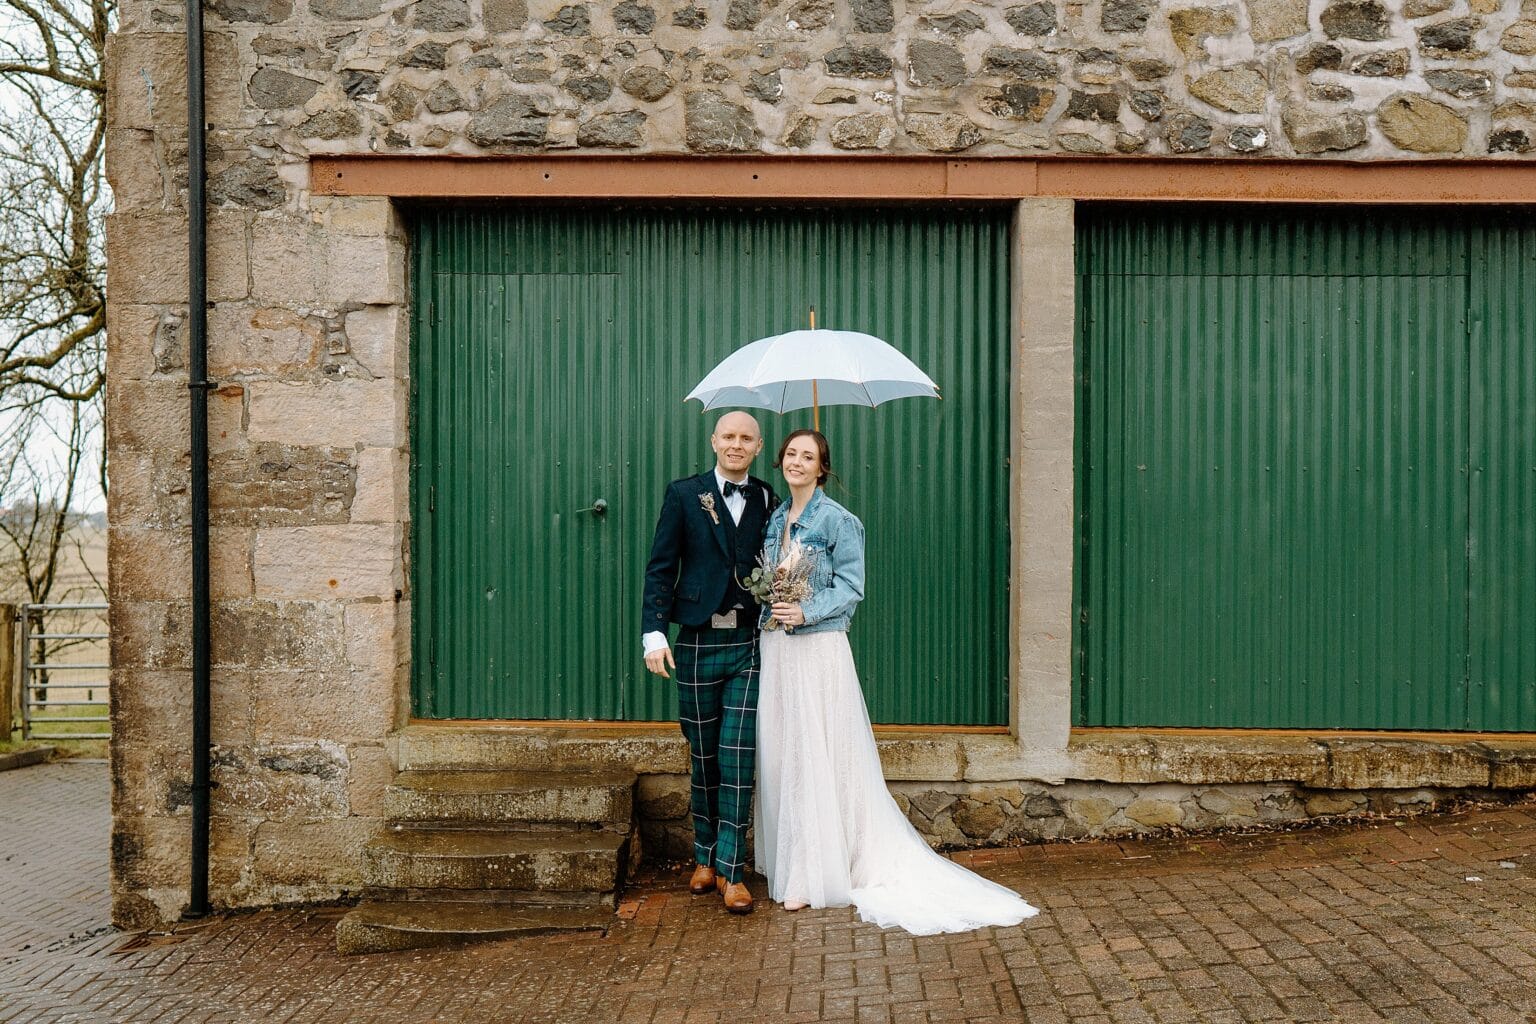 the bride is wearing a blue denim jacket and holding her dried flower bouquet as she and the groom stand underneath a white umbrella in front of green barn doors at their farm wedding venues scotland